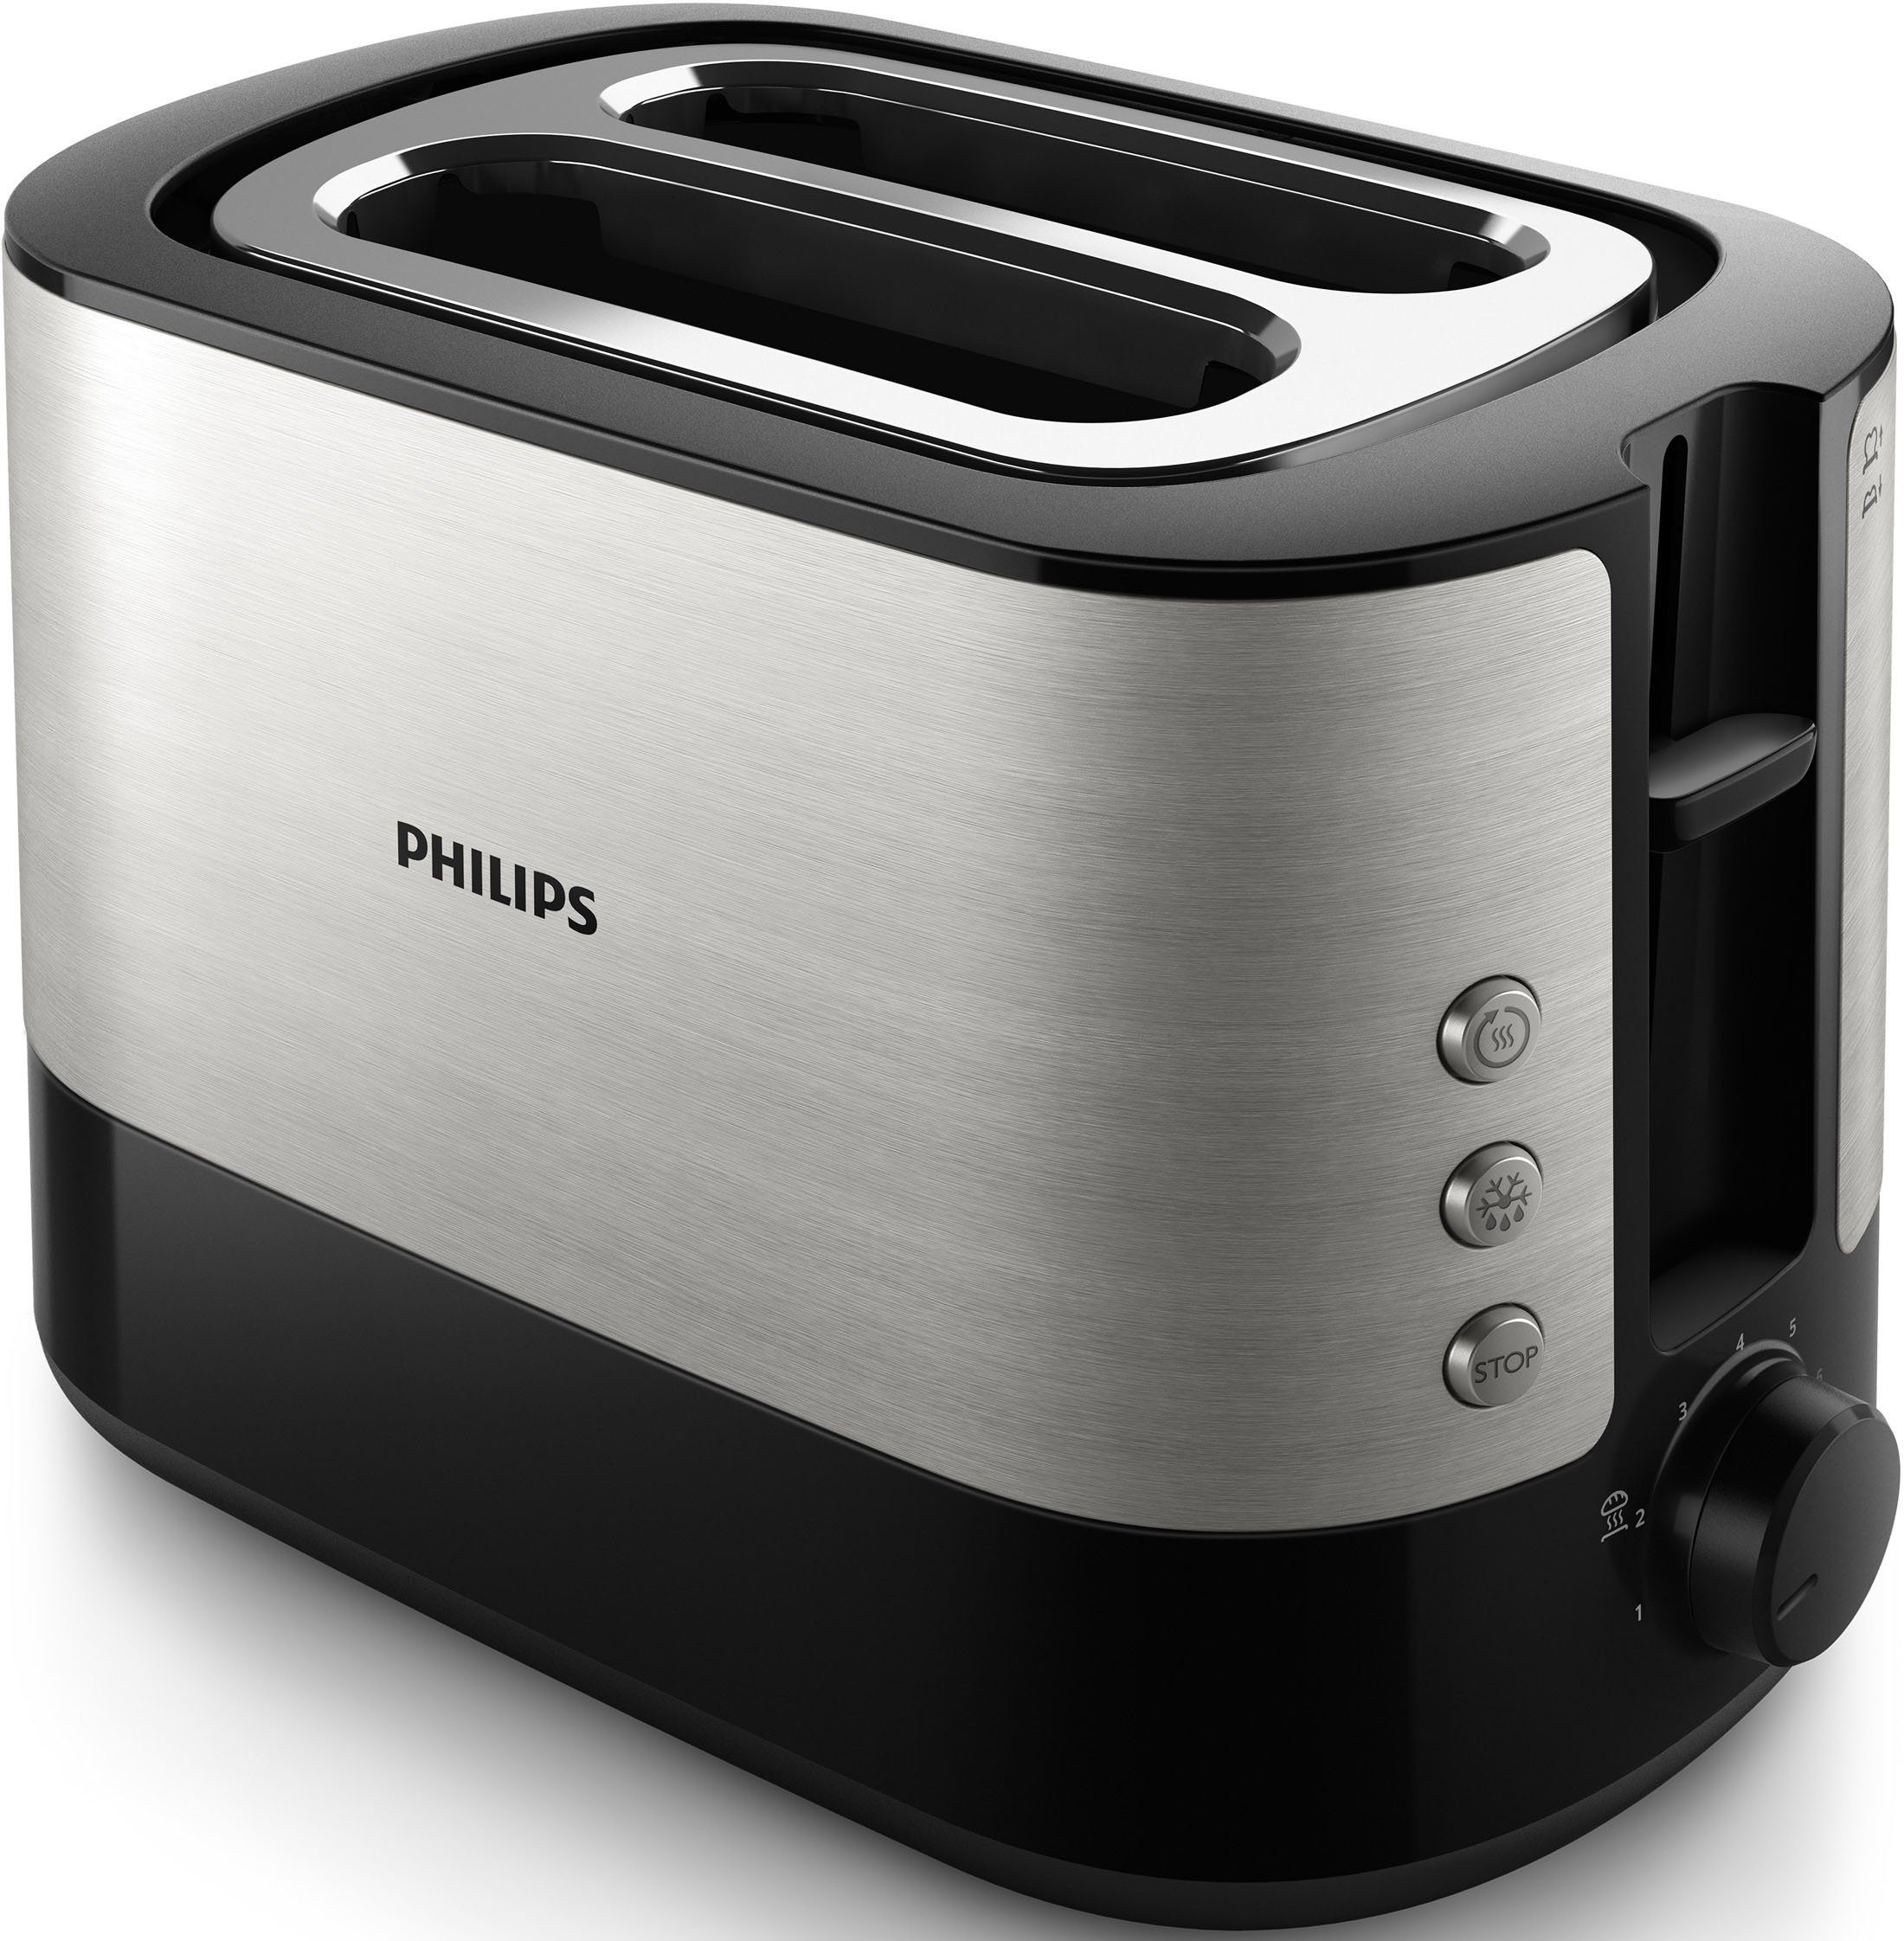 Philips HD2639/90, W 730 Toaster